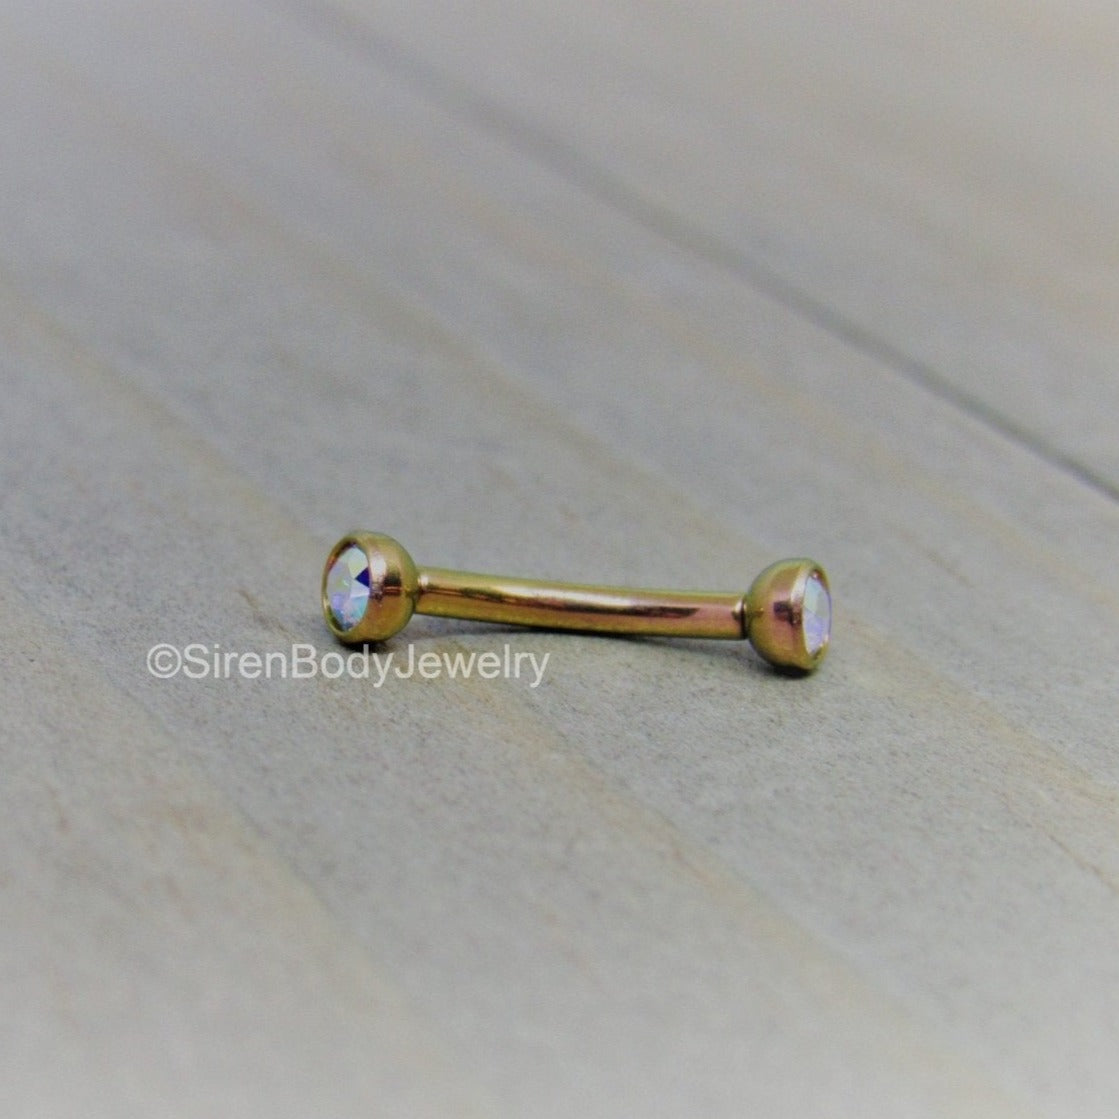 16g double gemstone daith piercing curved barbell earring titanium